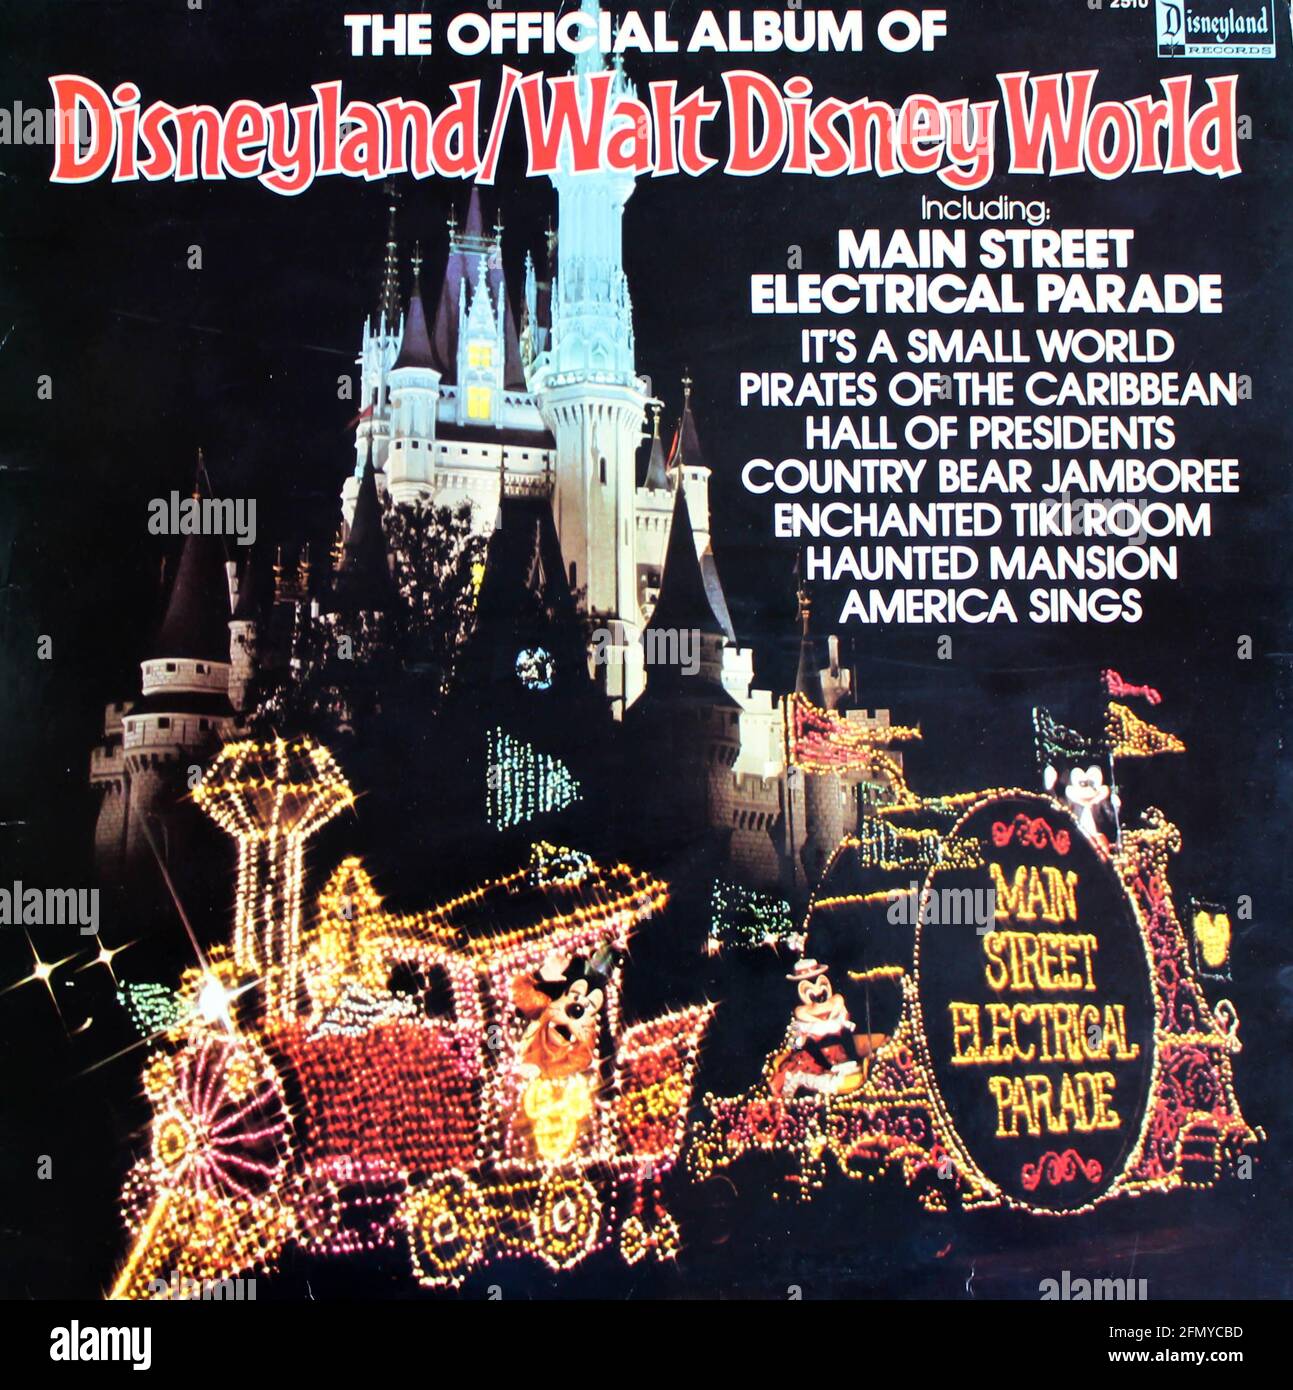 The Official Album Of Disneyland/Walt Disney World on vinyl record LP disc cover album. Including Main Street electrical Parade and It's a small world Stock Photo